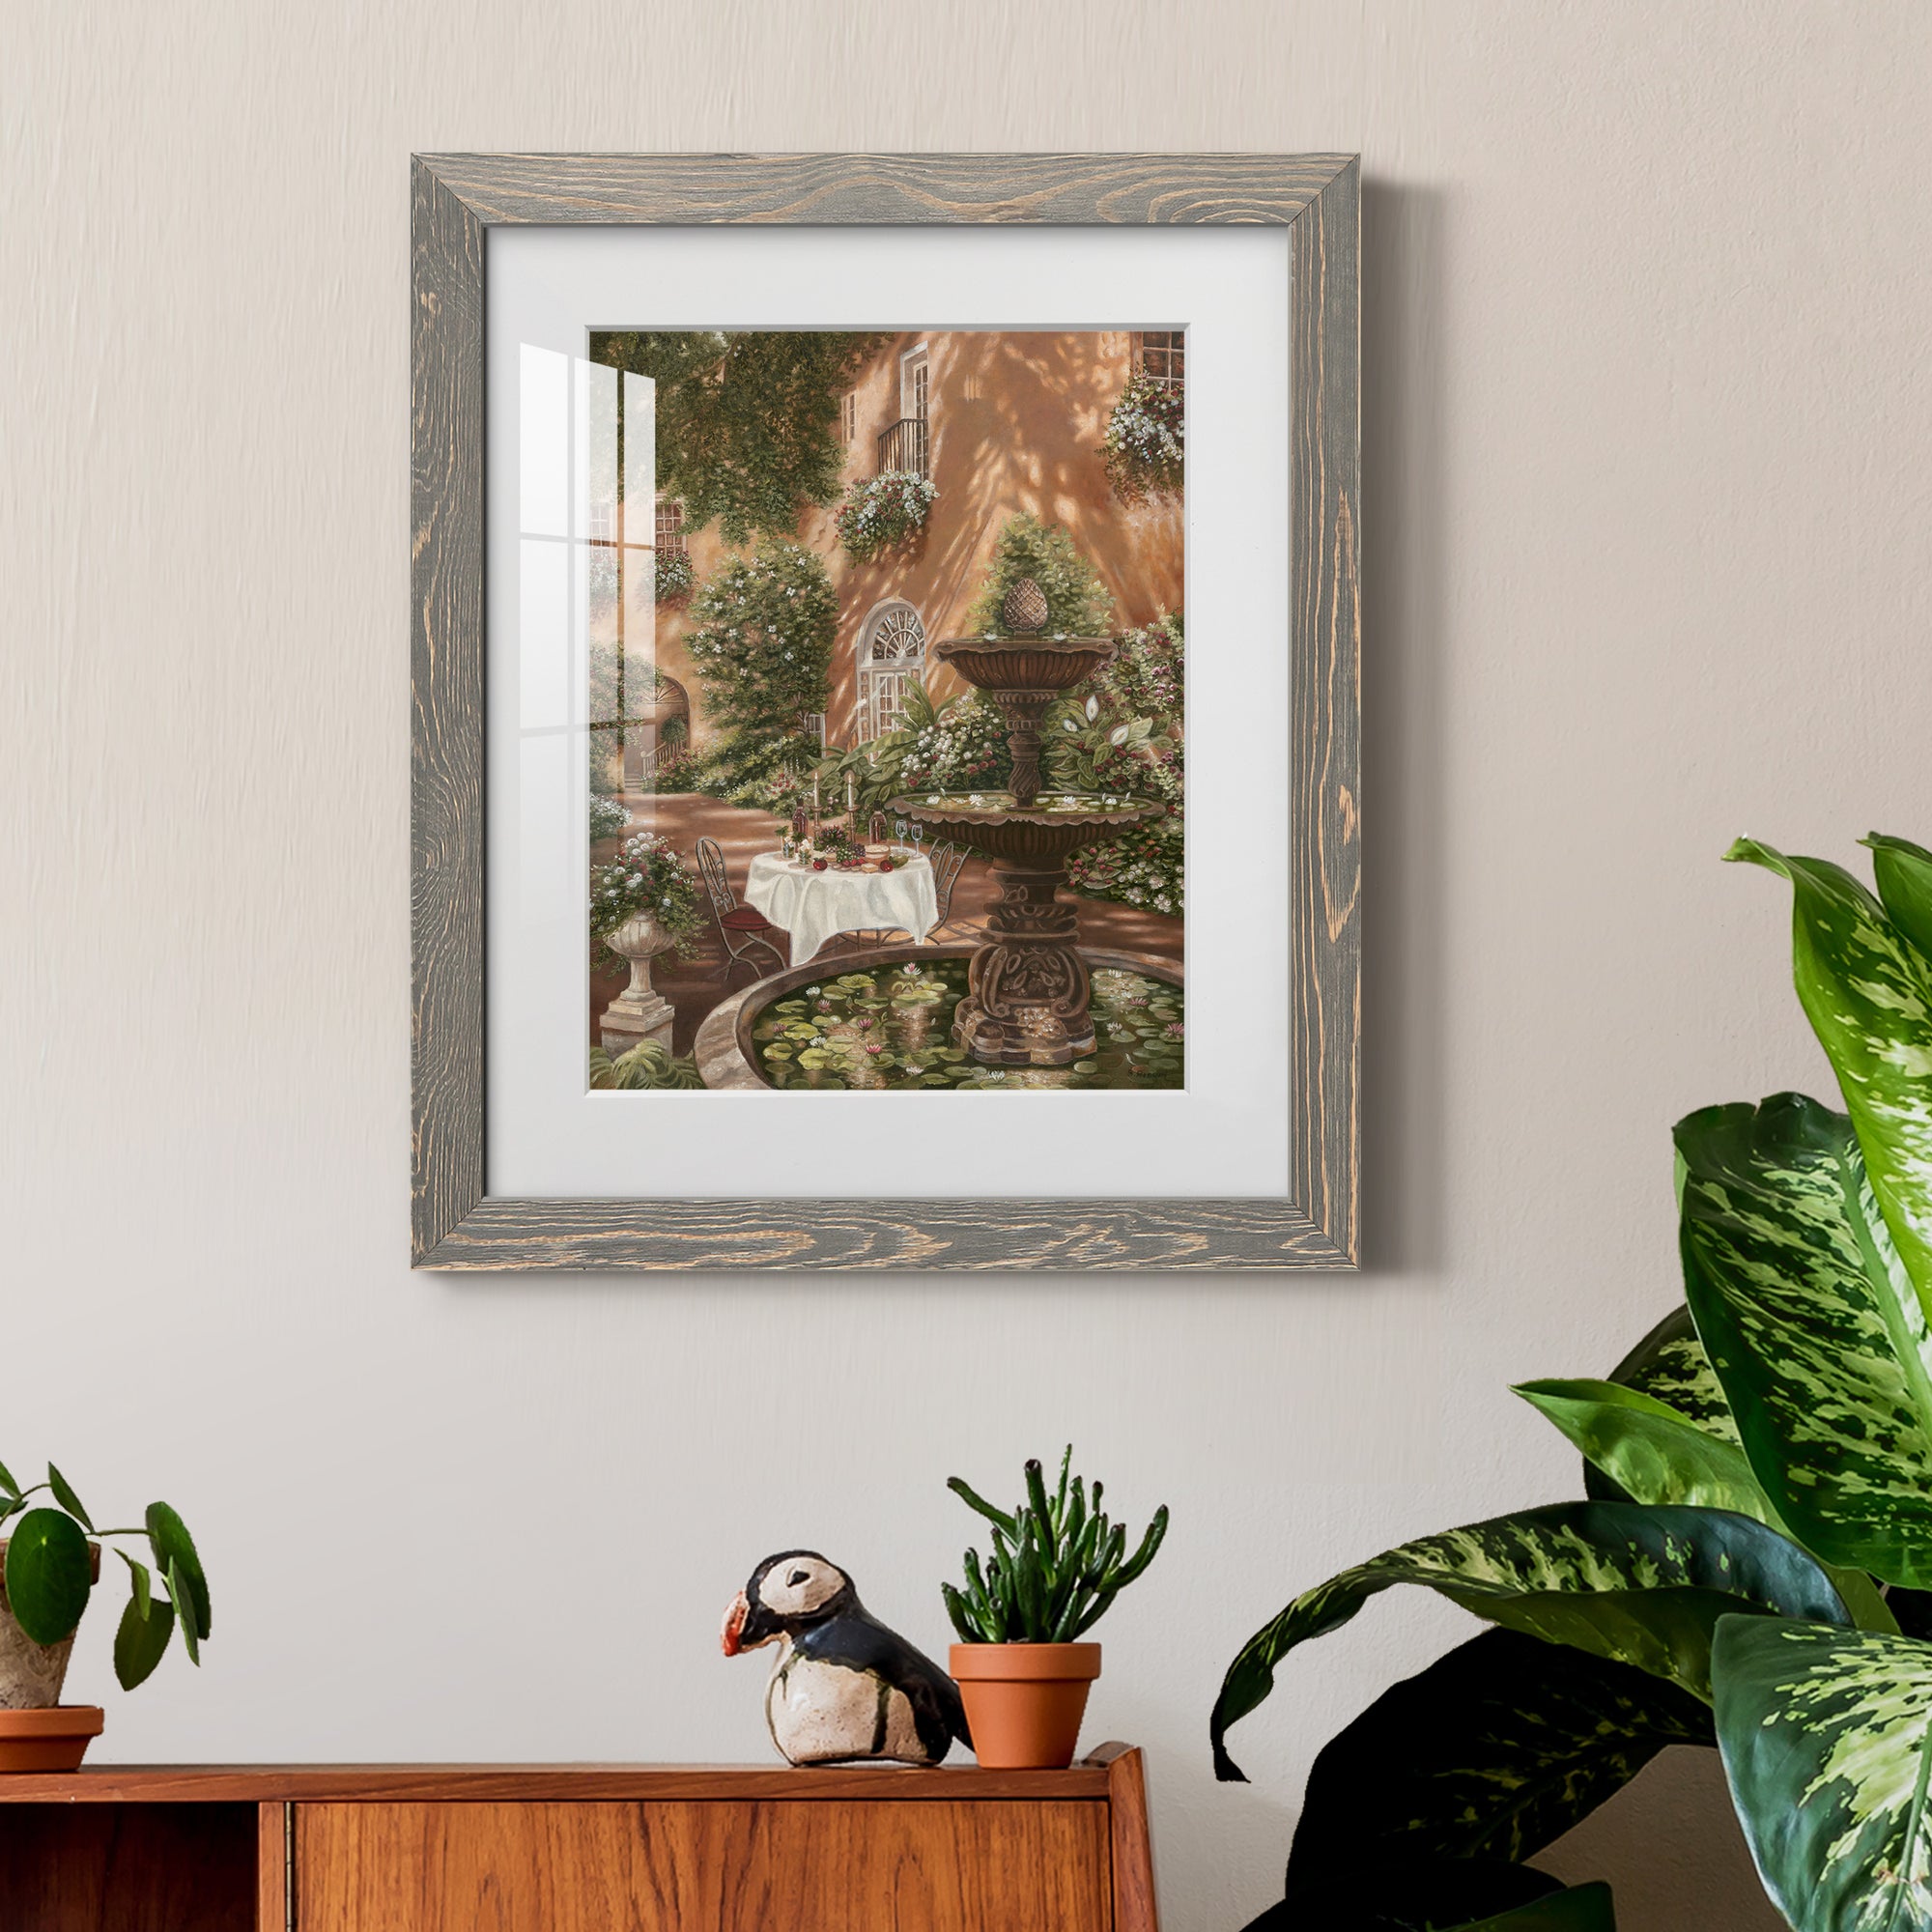 Evening Cocktails II - Premium Framed Print - Distressed Barnwood Frame - Ready to Hang